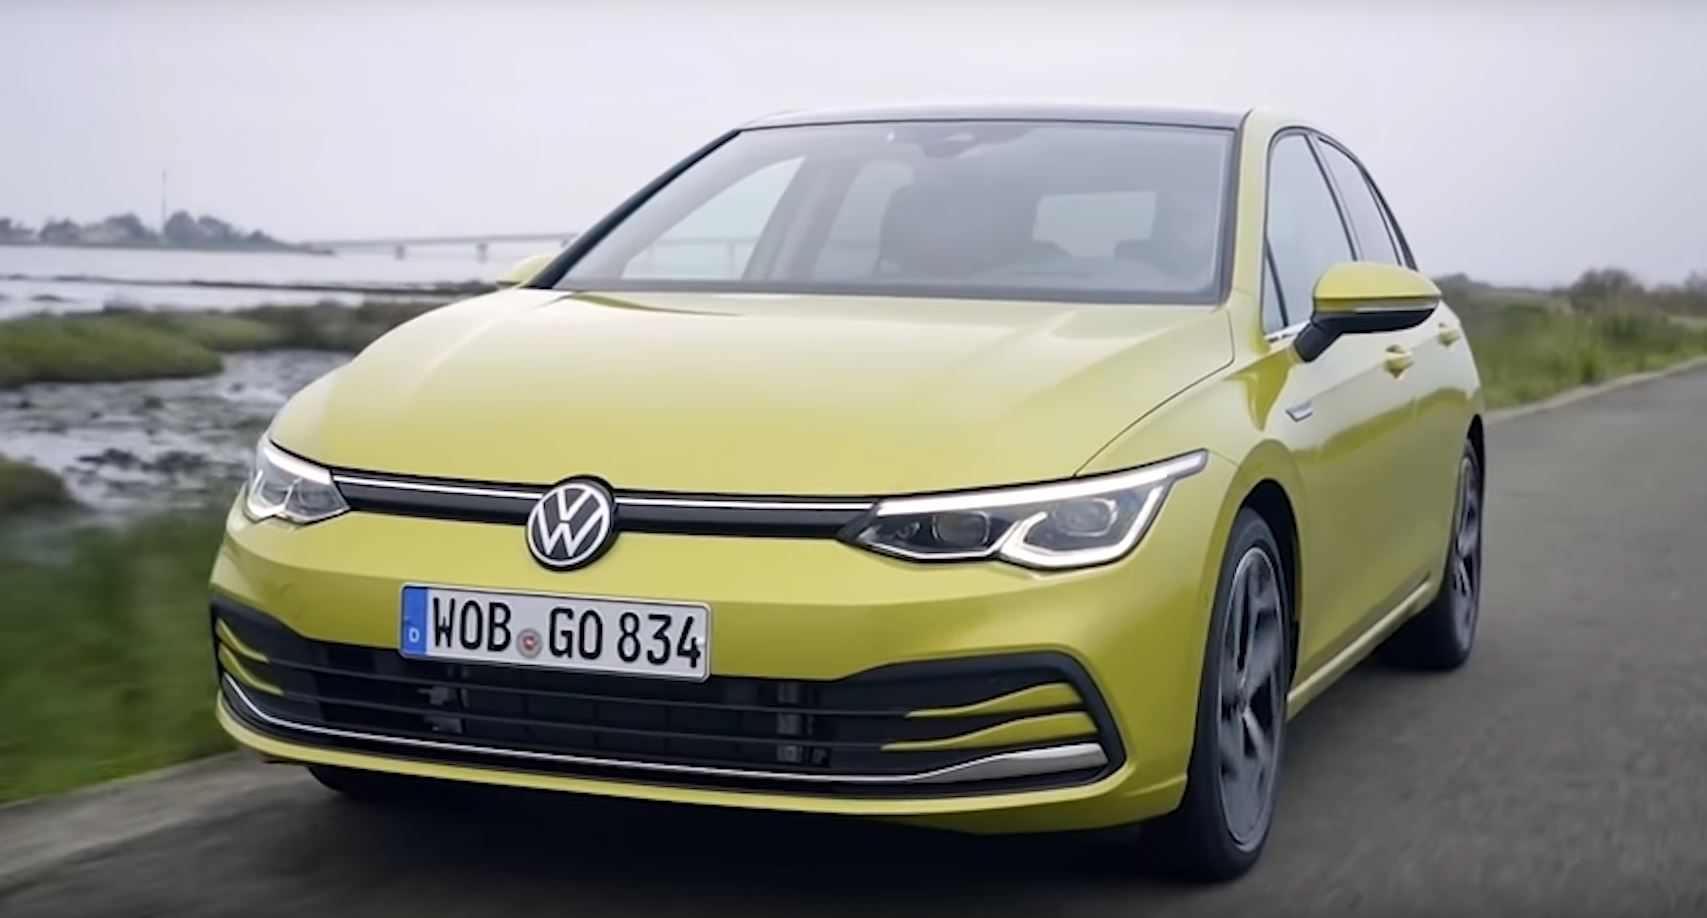 All-new 2020 Volkswagen Golf unveiled